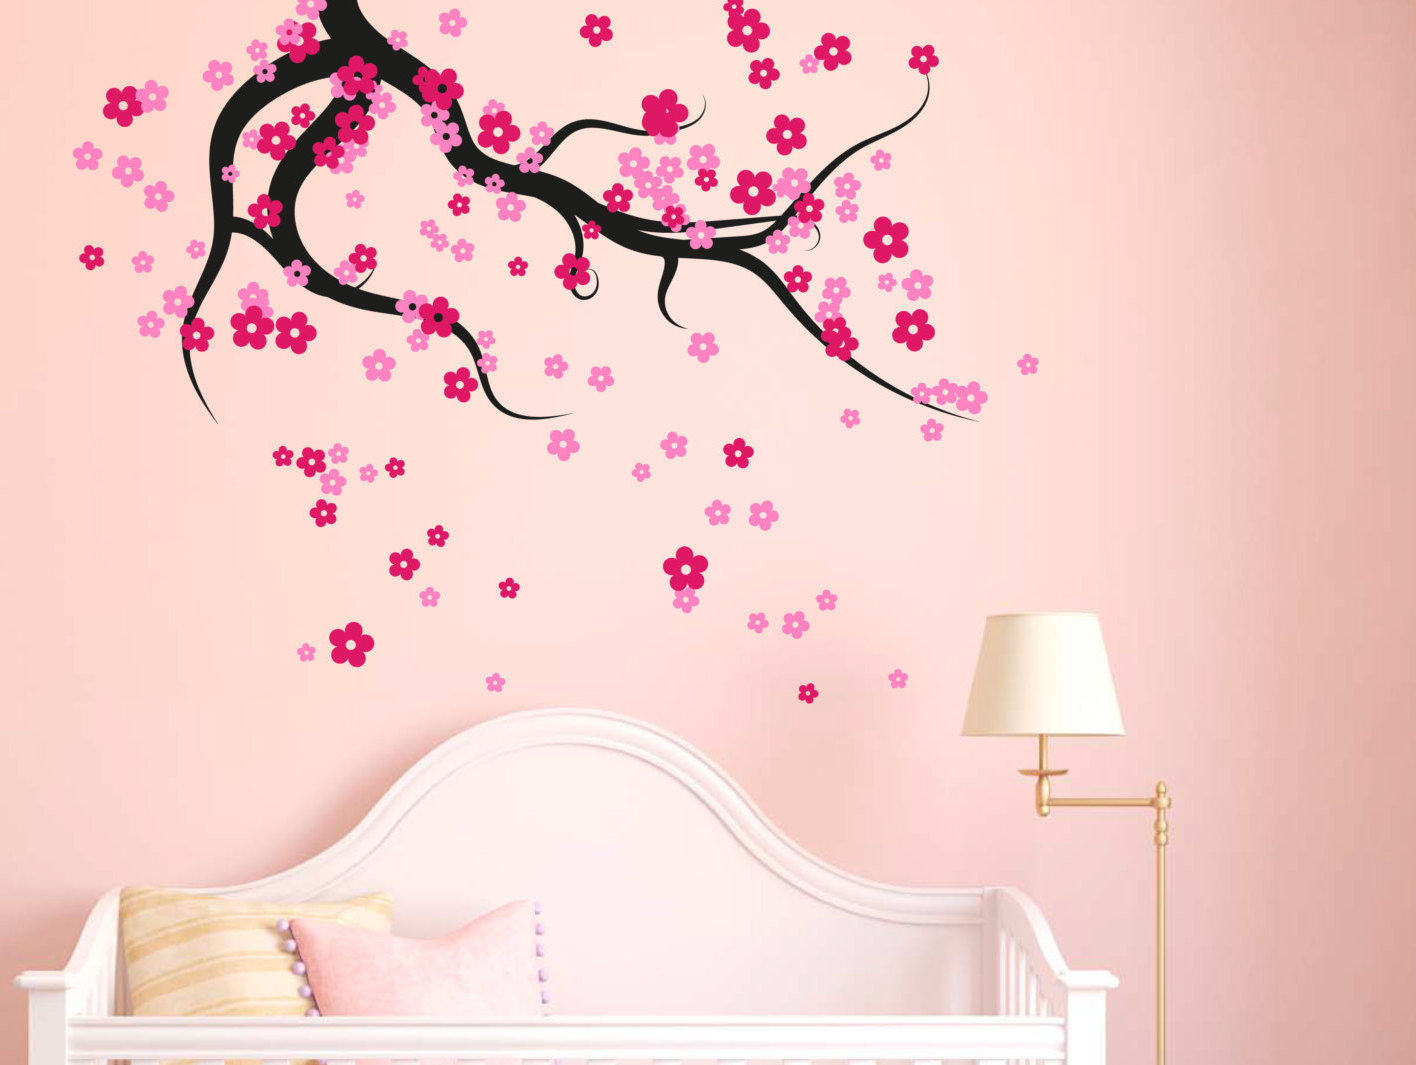 ceiling tree branch with falling blossoms